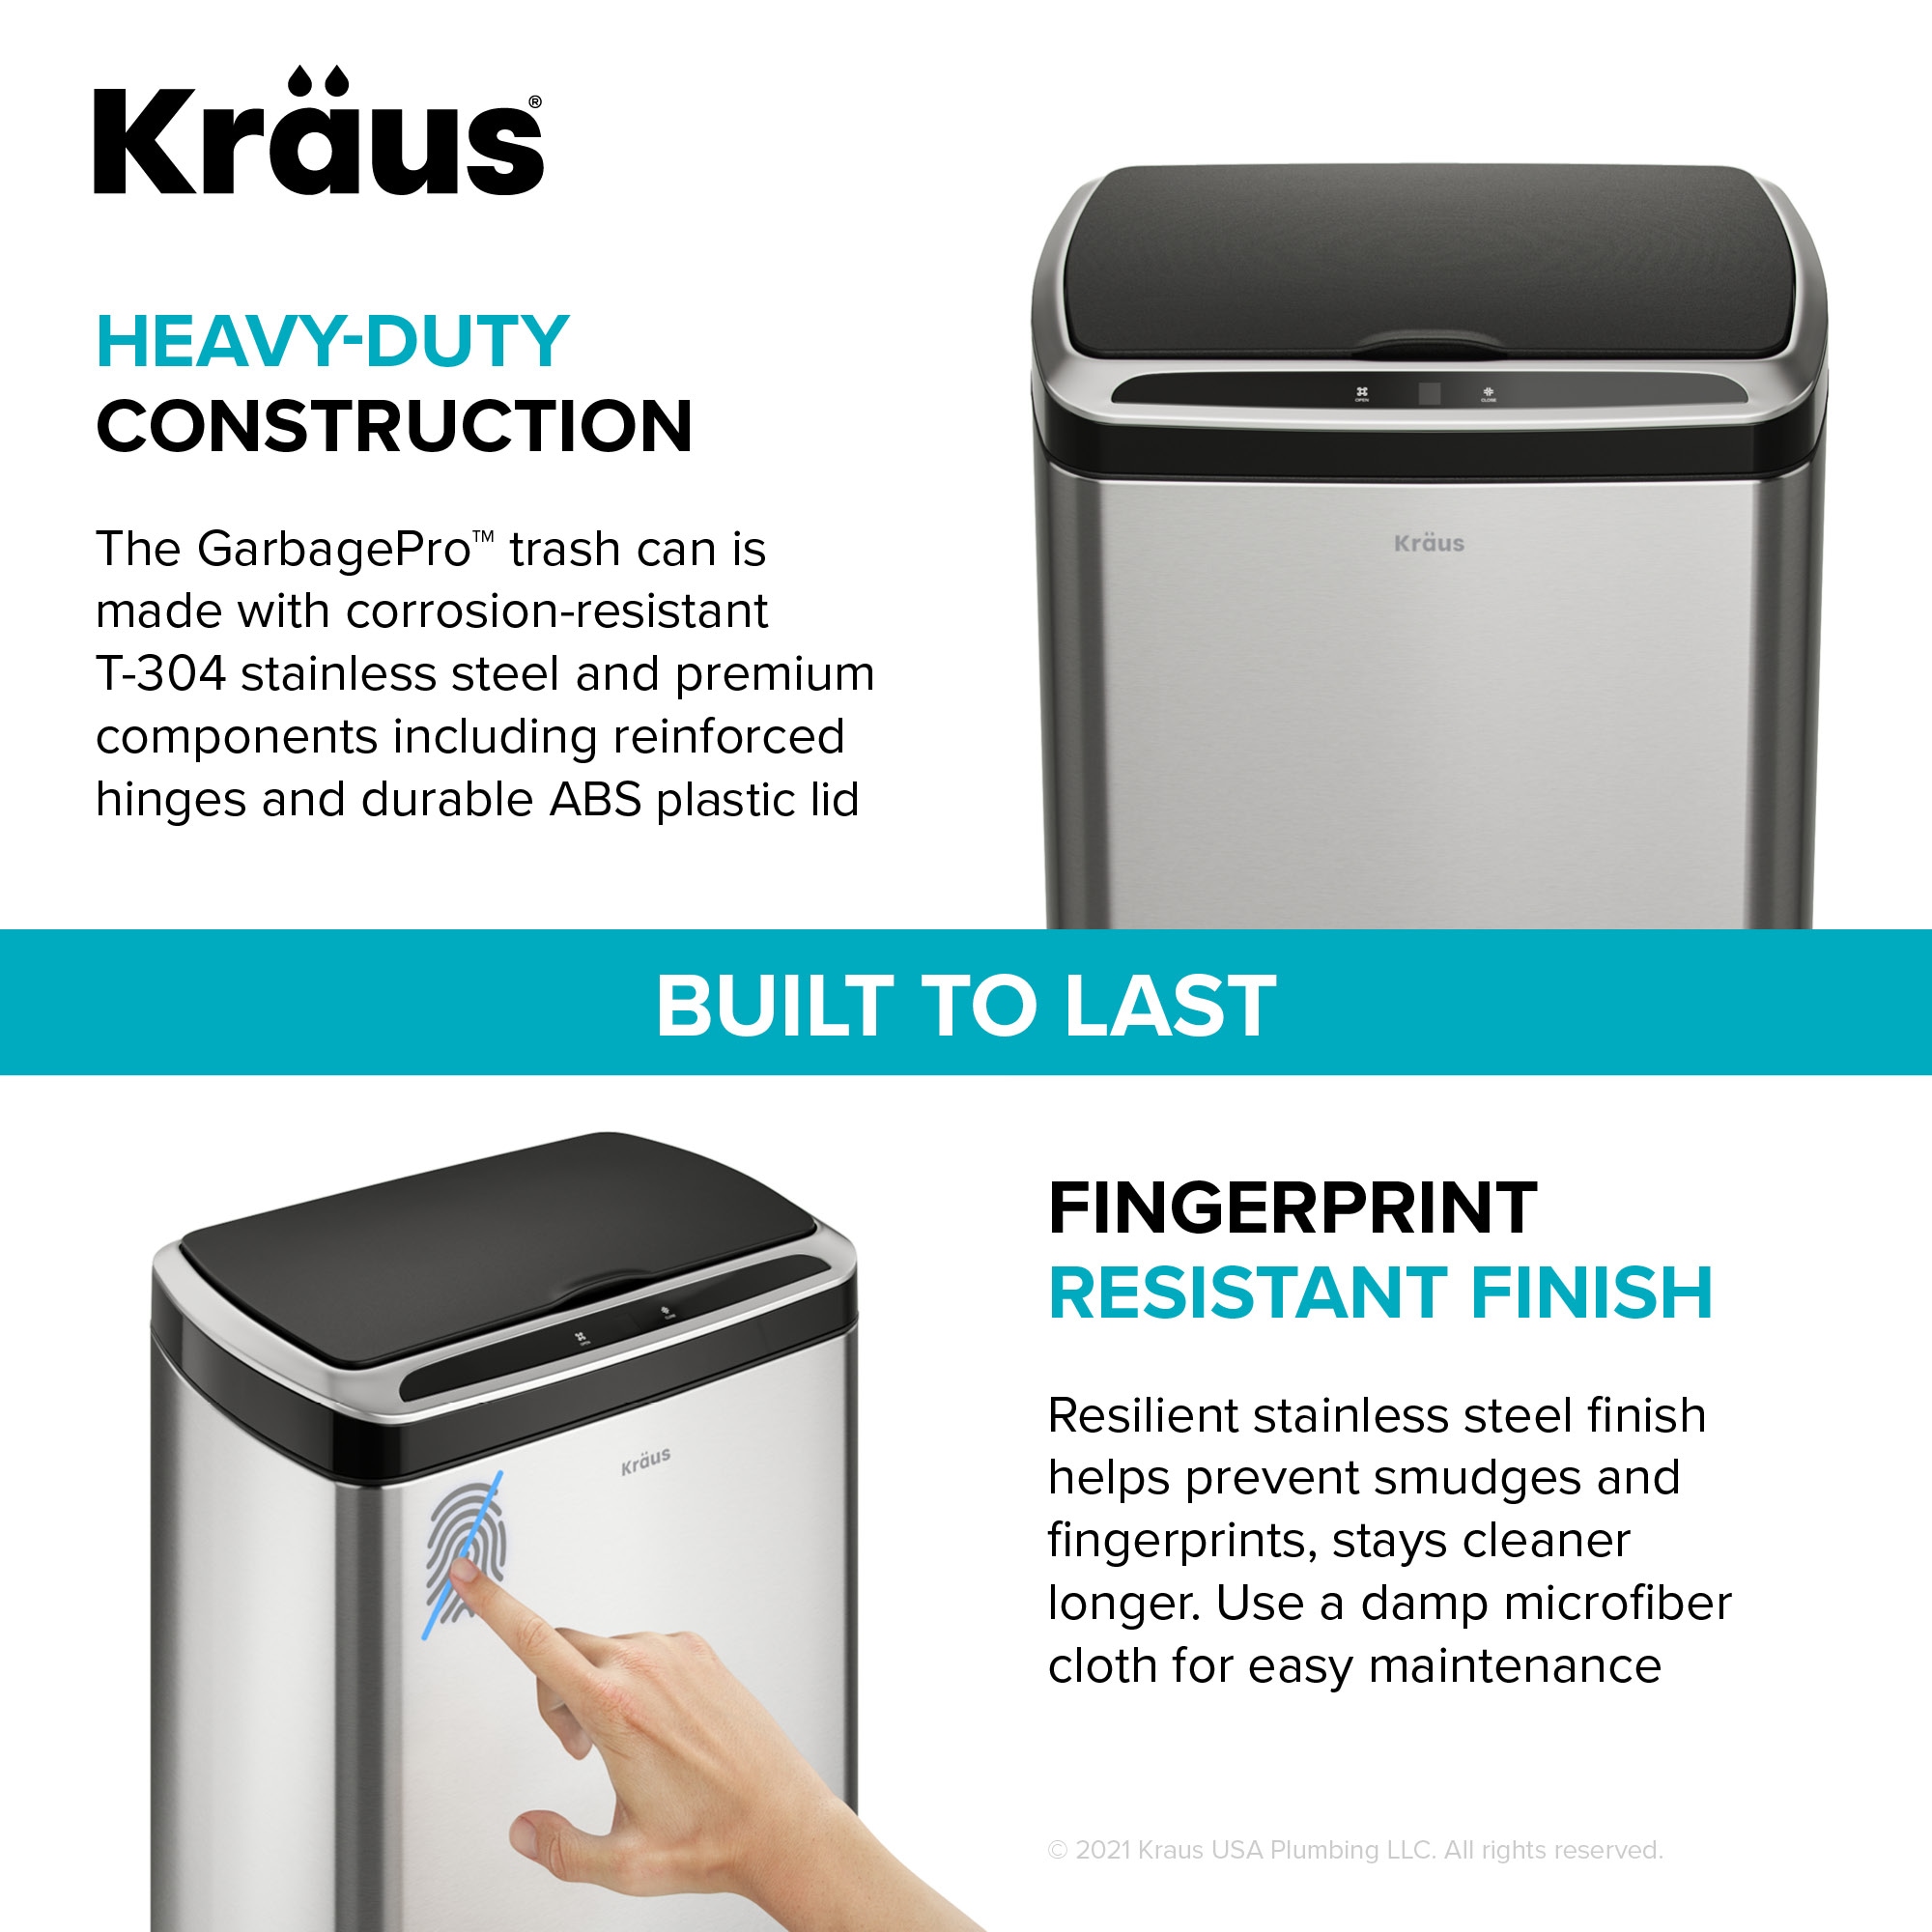 GarbagePro™ Rectangular 13 Gallon (50 Liter) Touchless Motion Sensor Trash  Can in Matte Black or Stainless Steel Finish with SoftShut™ Lid by KRAUS